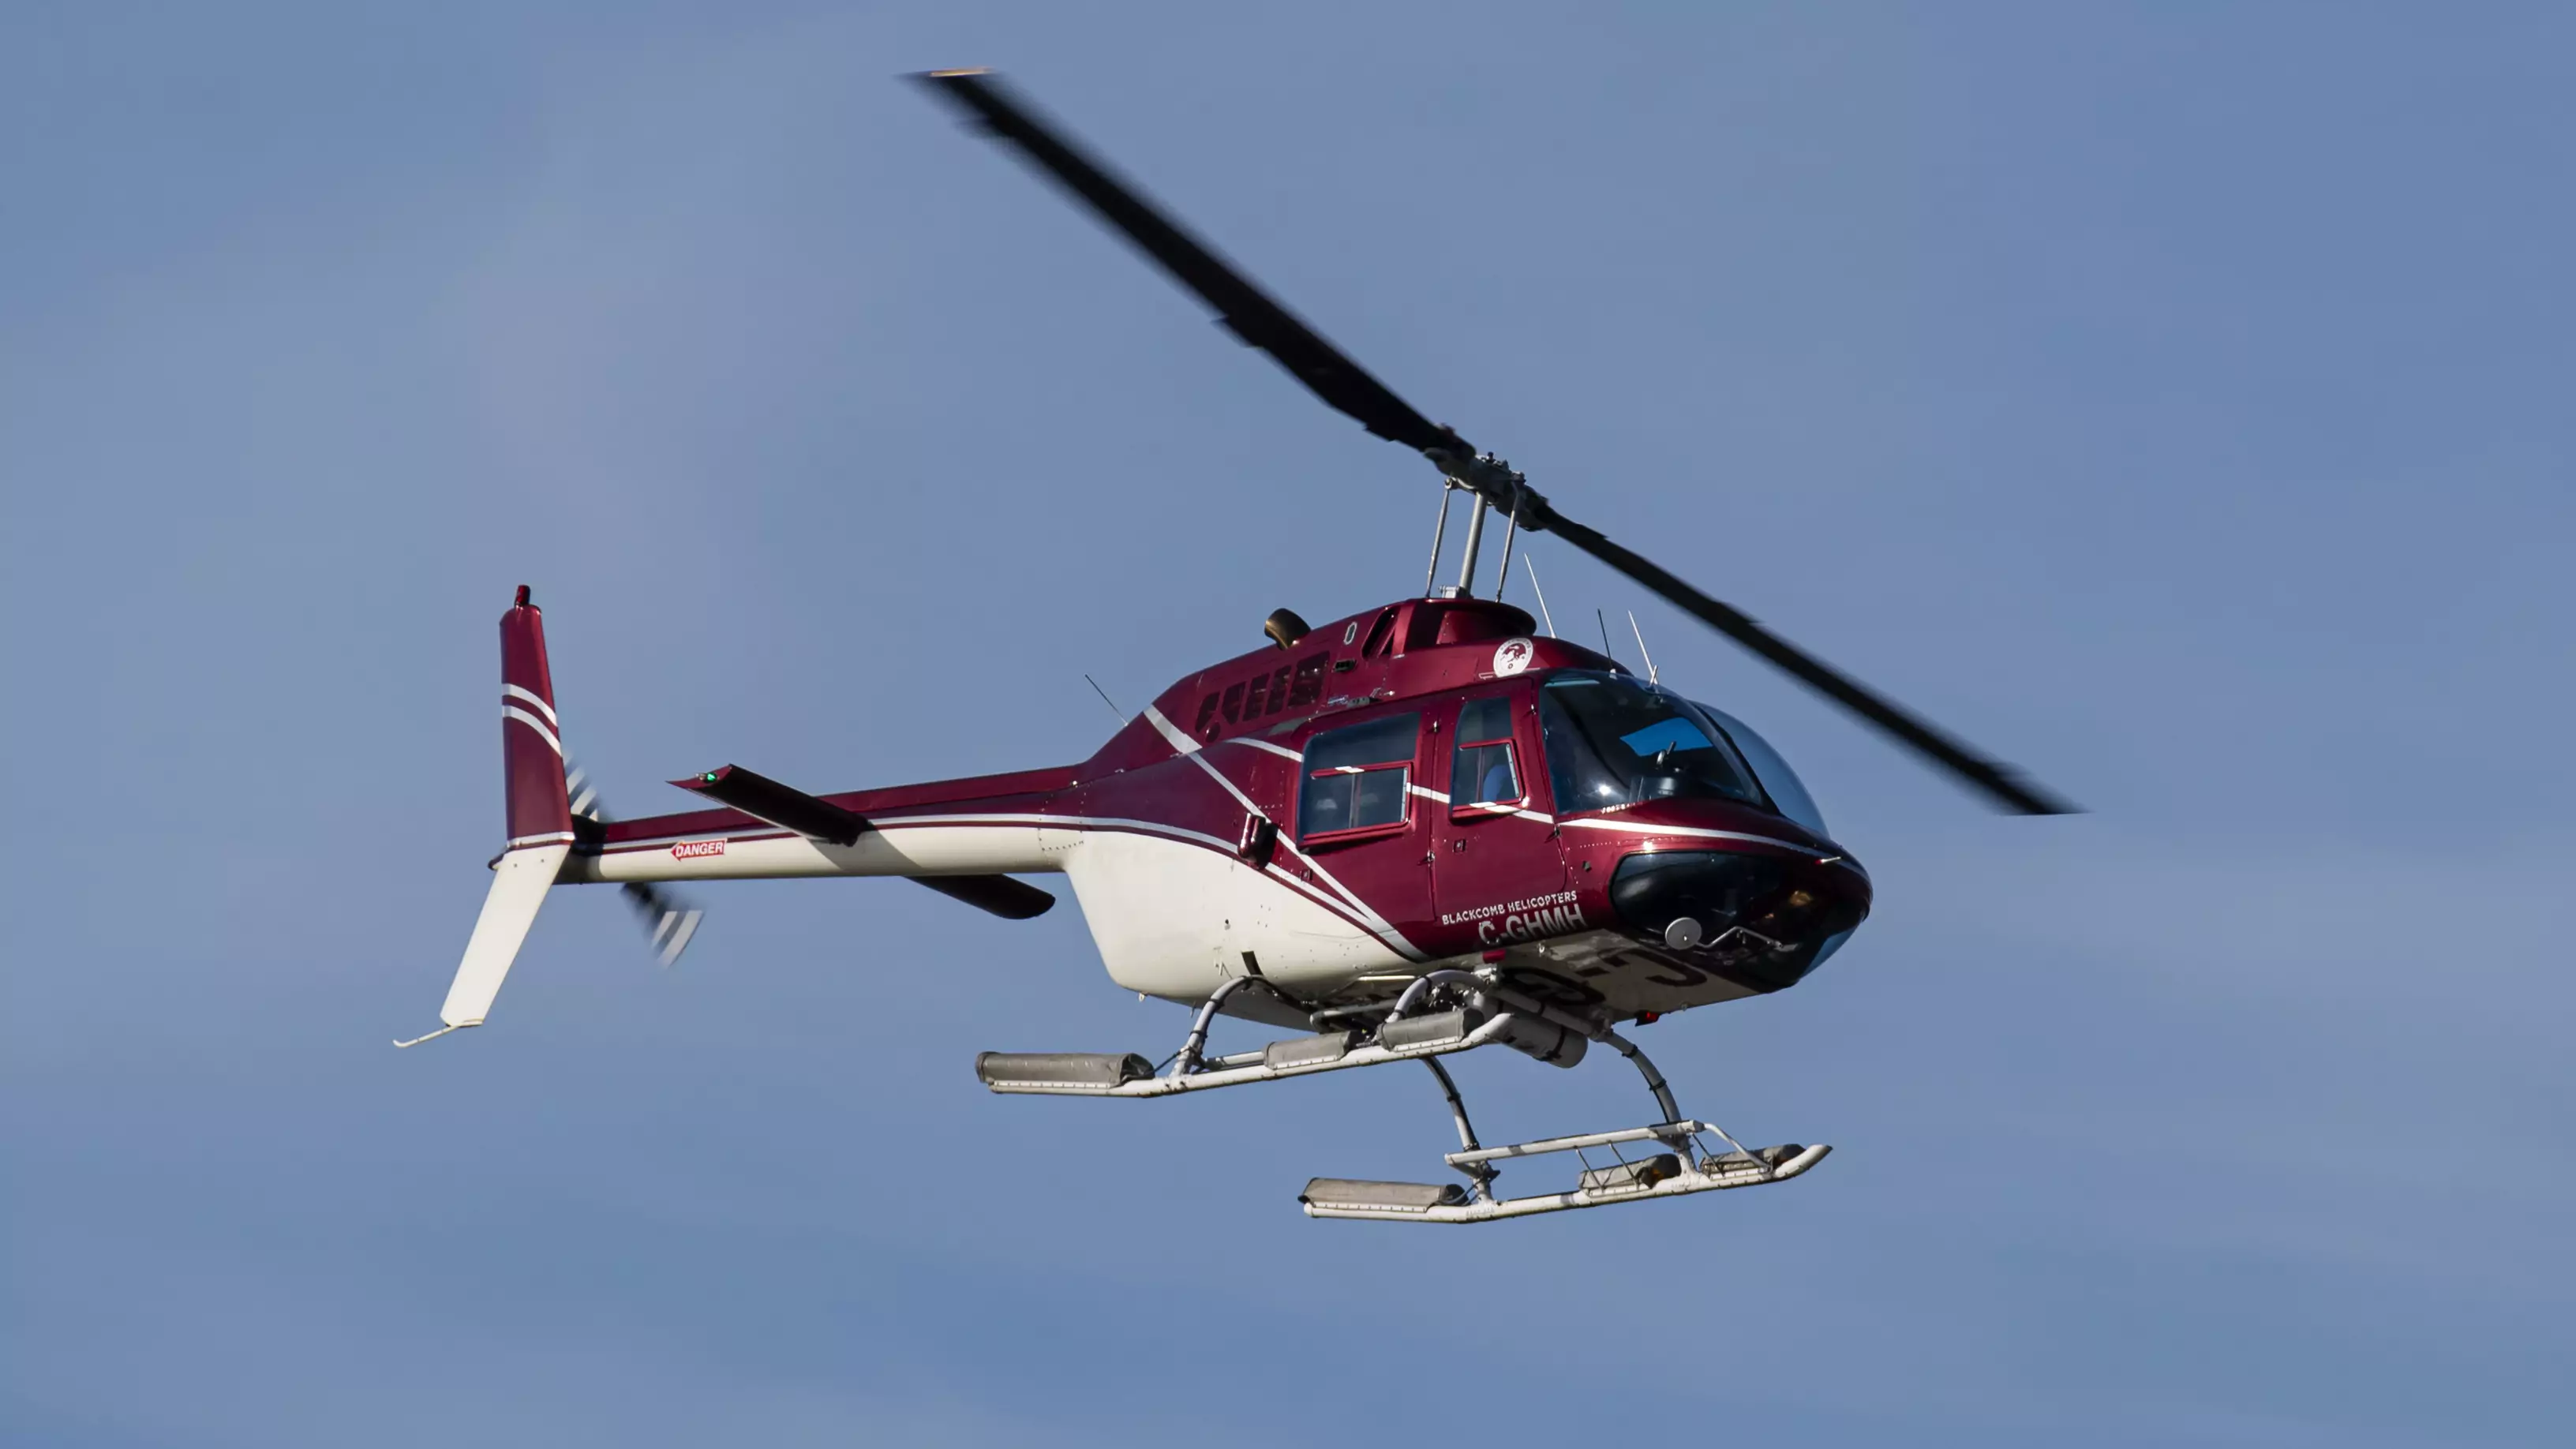 Man Is Building His Own Helicopter From Scratch Because He's Sick Of Traffic